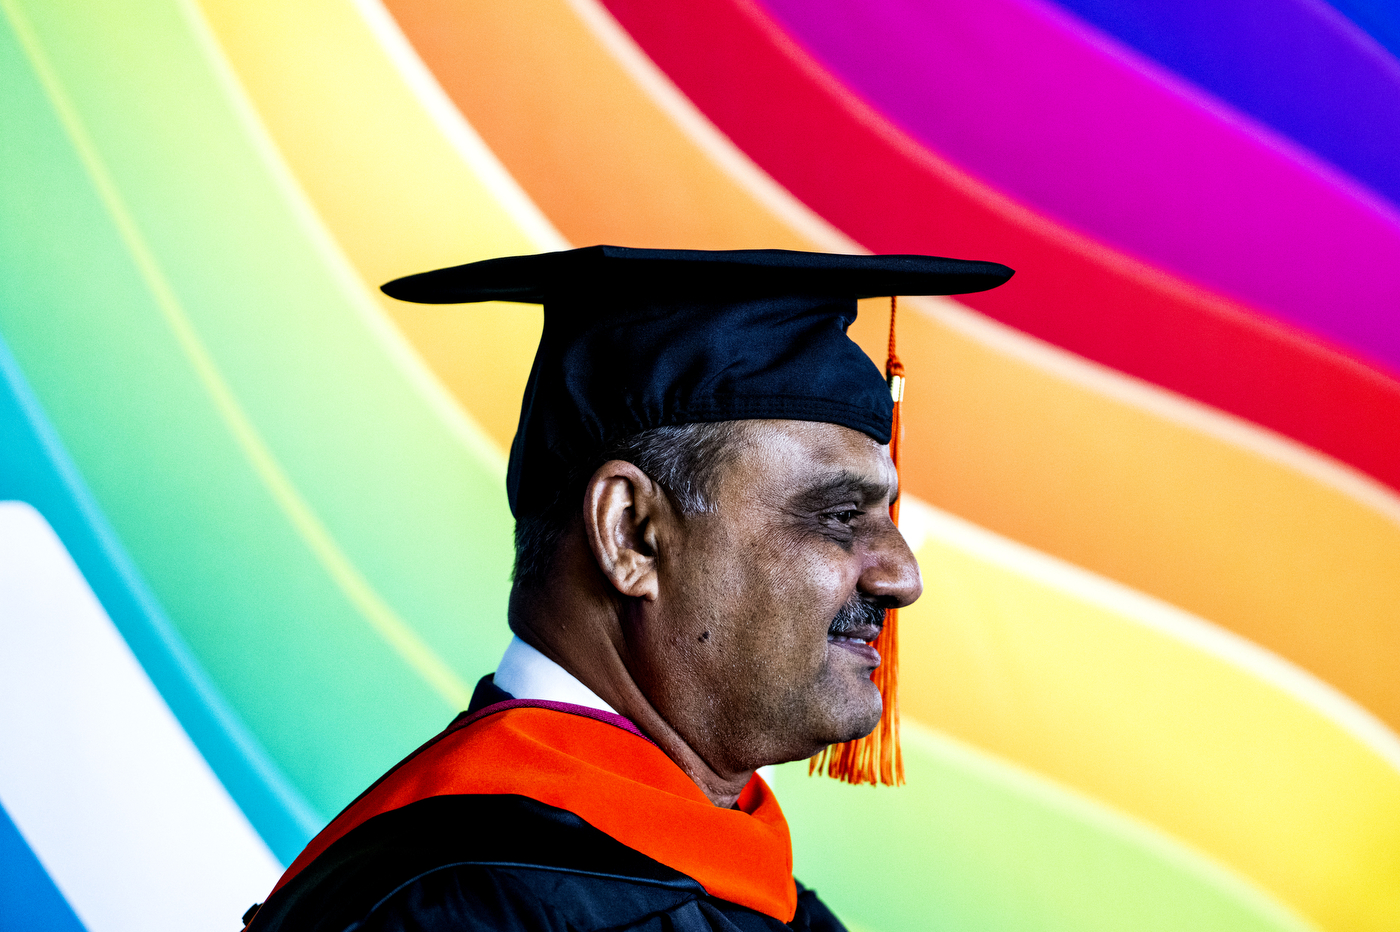 person wearing cap and gown on rainbow background